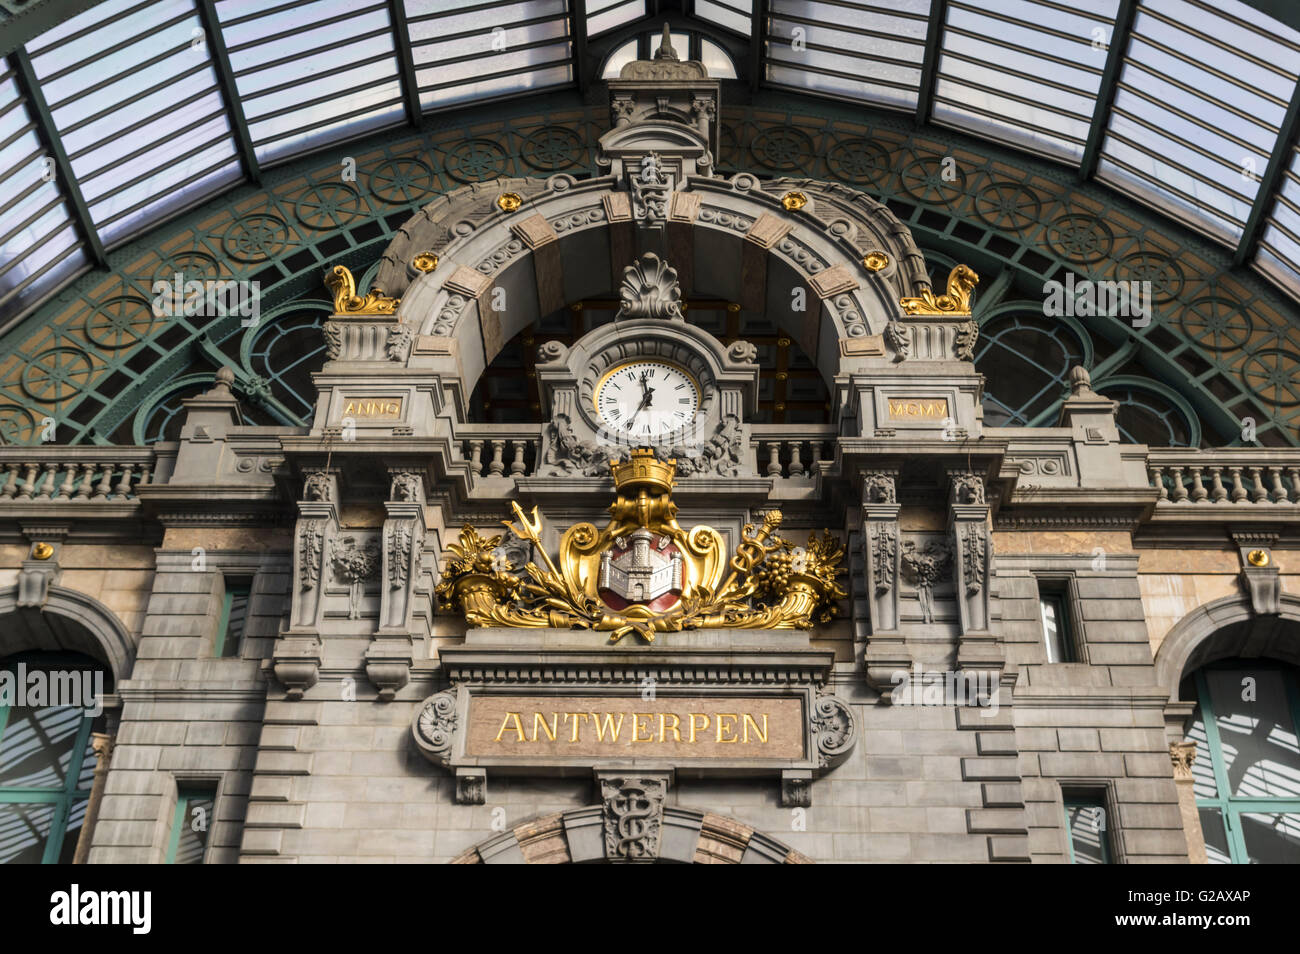 Ornaments and clock of Antwerpen Centraal train station, inaugurated 1905. Antwerp, Belgium. Stock Photo